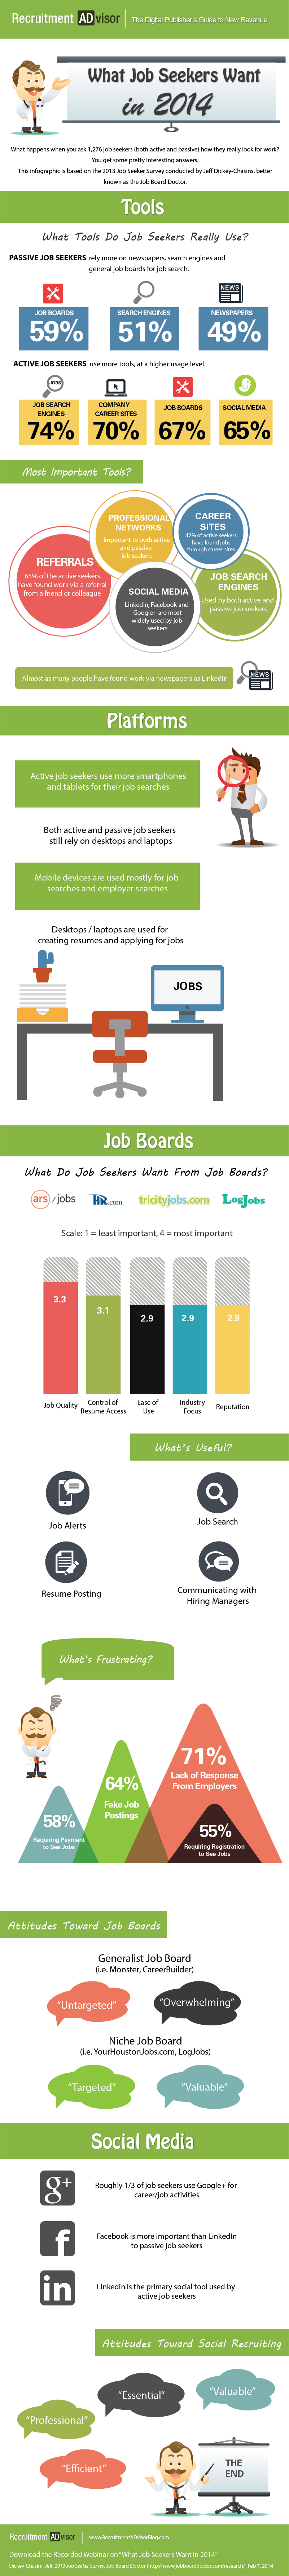 What does job seekers want in 2014